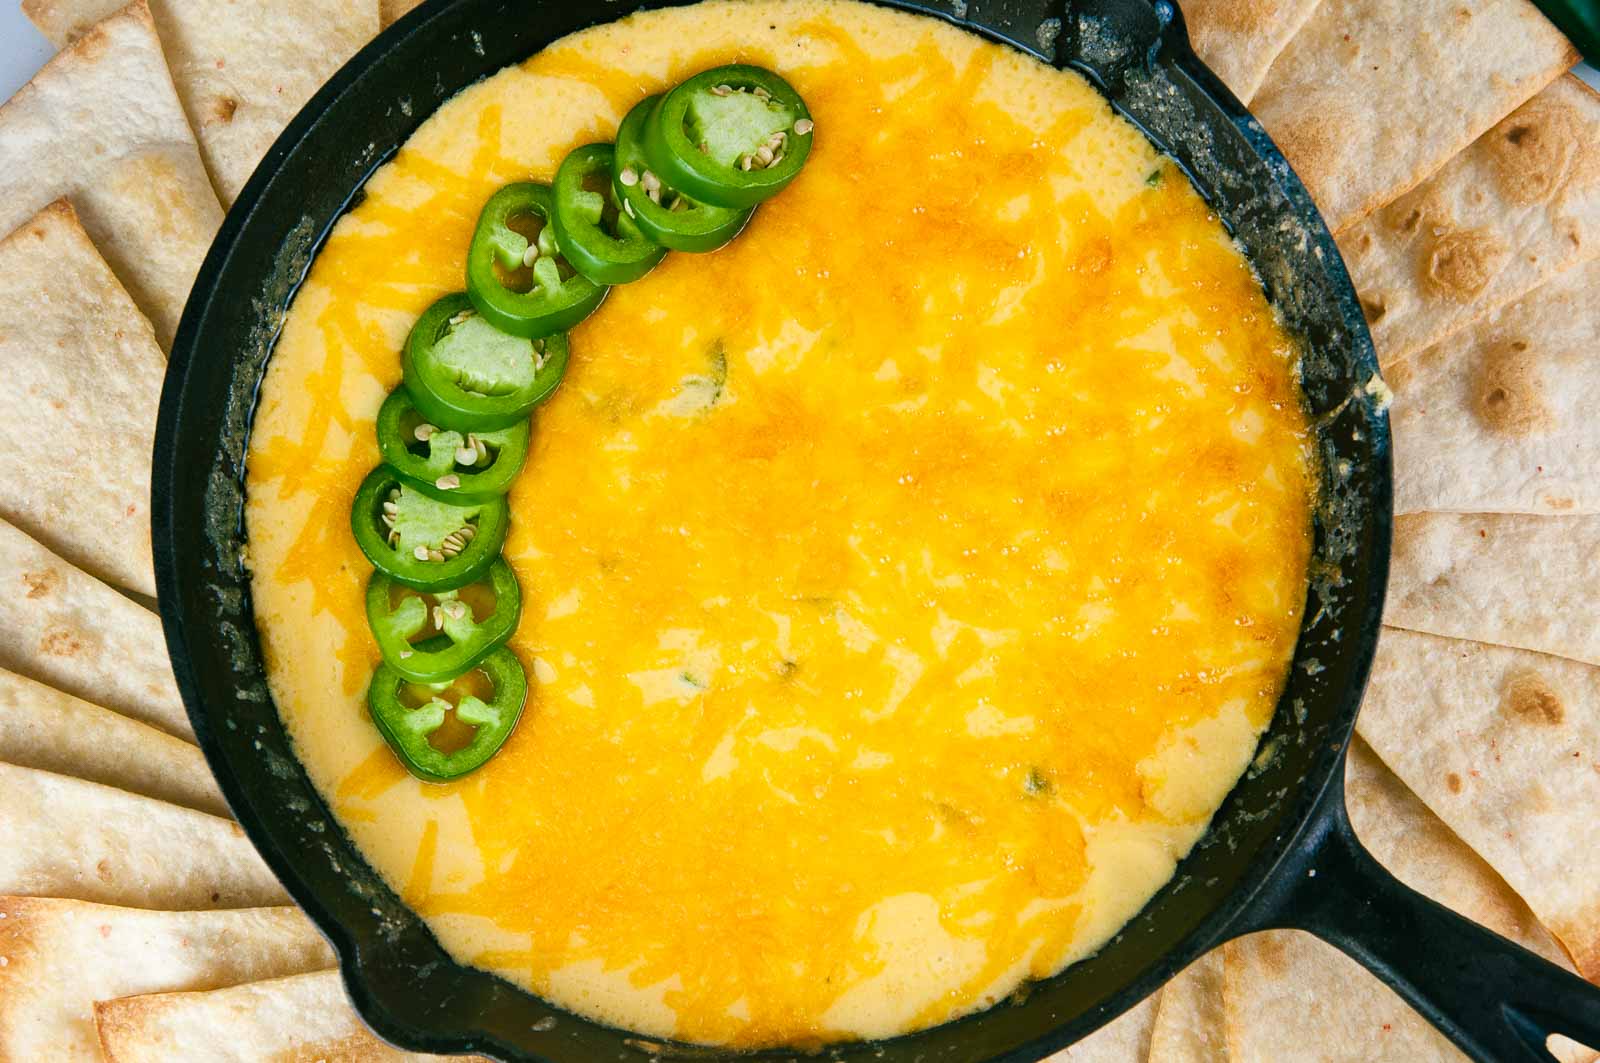 A tortilla chip gets dunked into creamy, cheesy jalapeno popper dip.